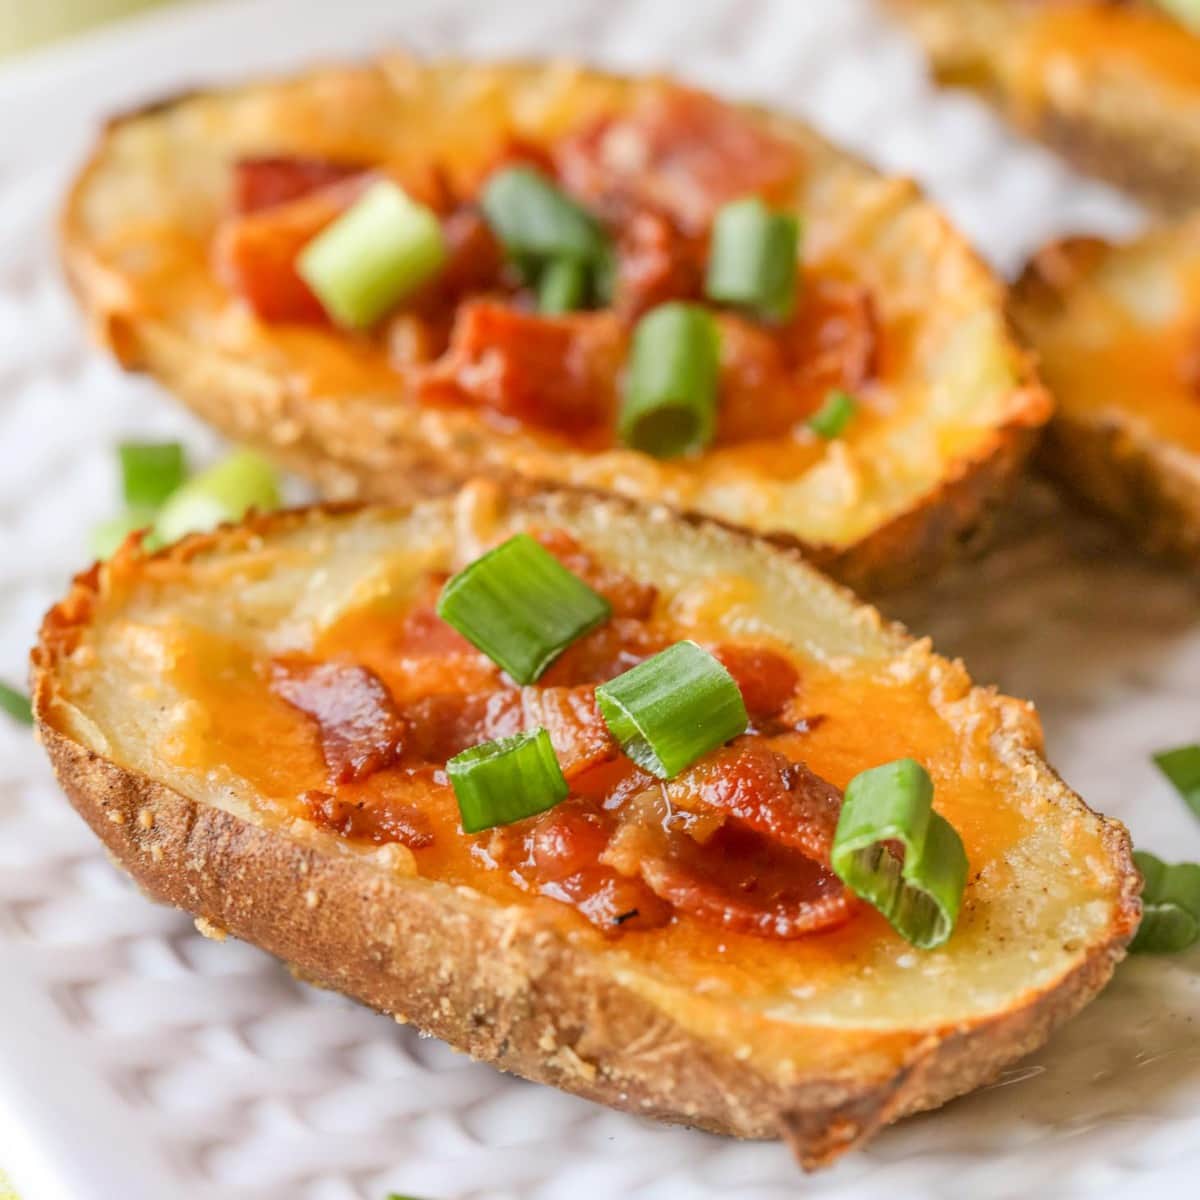 Finger food appetizers - a plate filled with parmesan crusted potato skins.